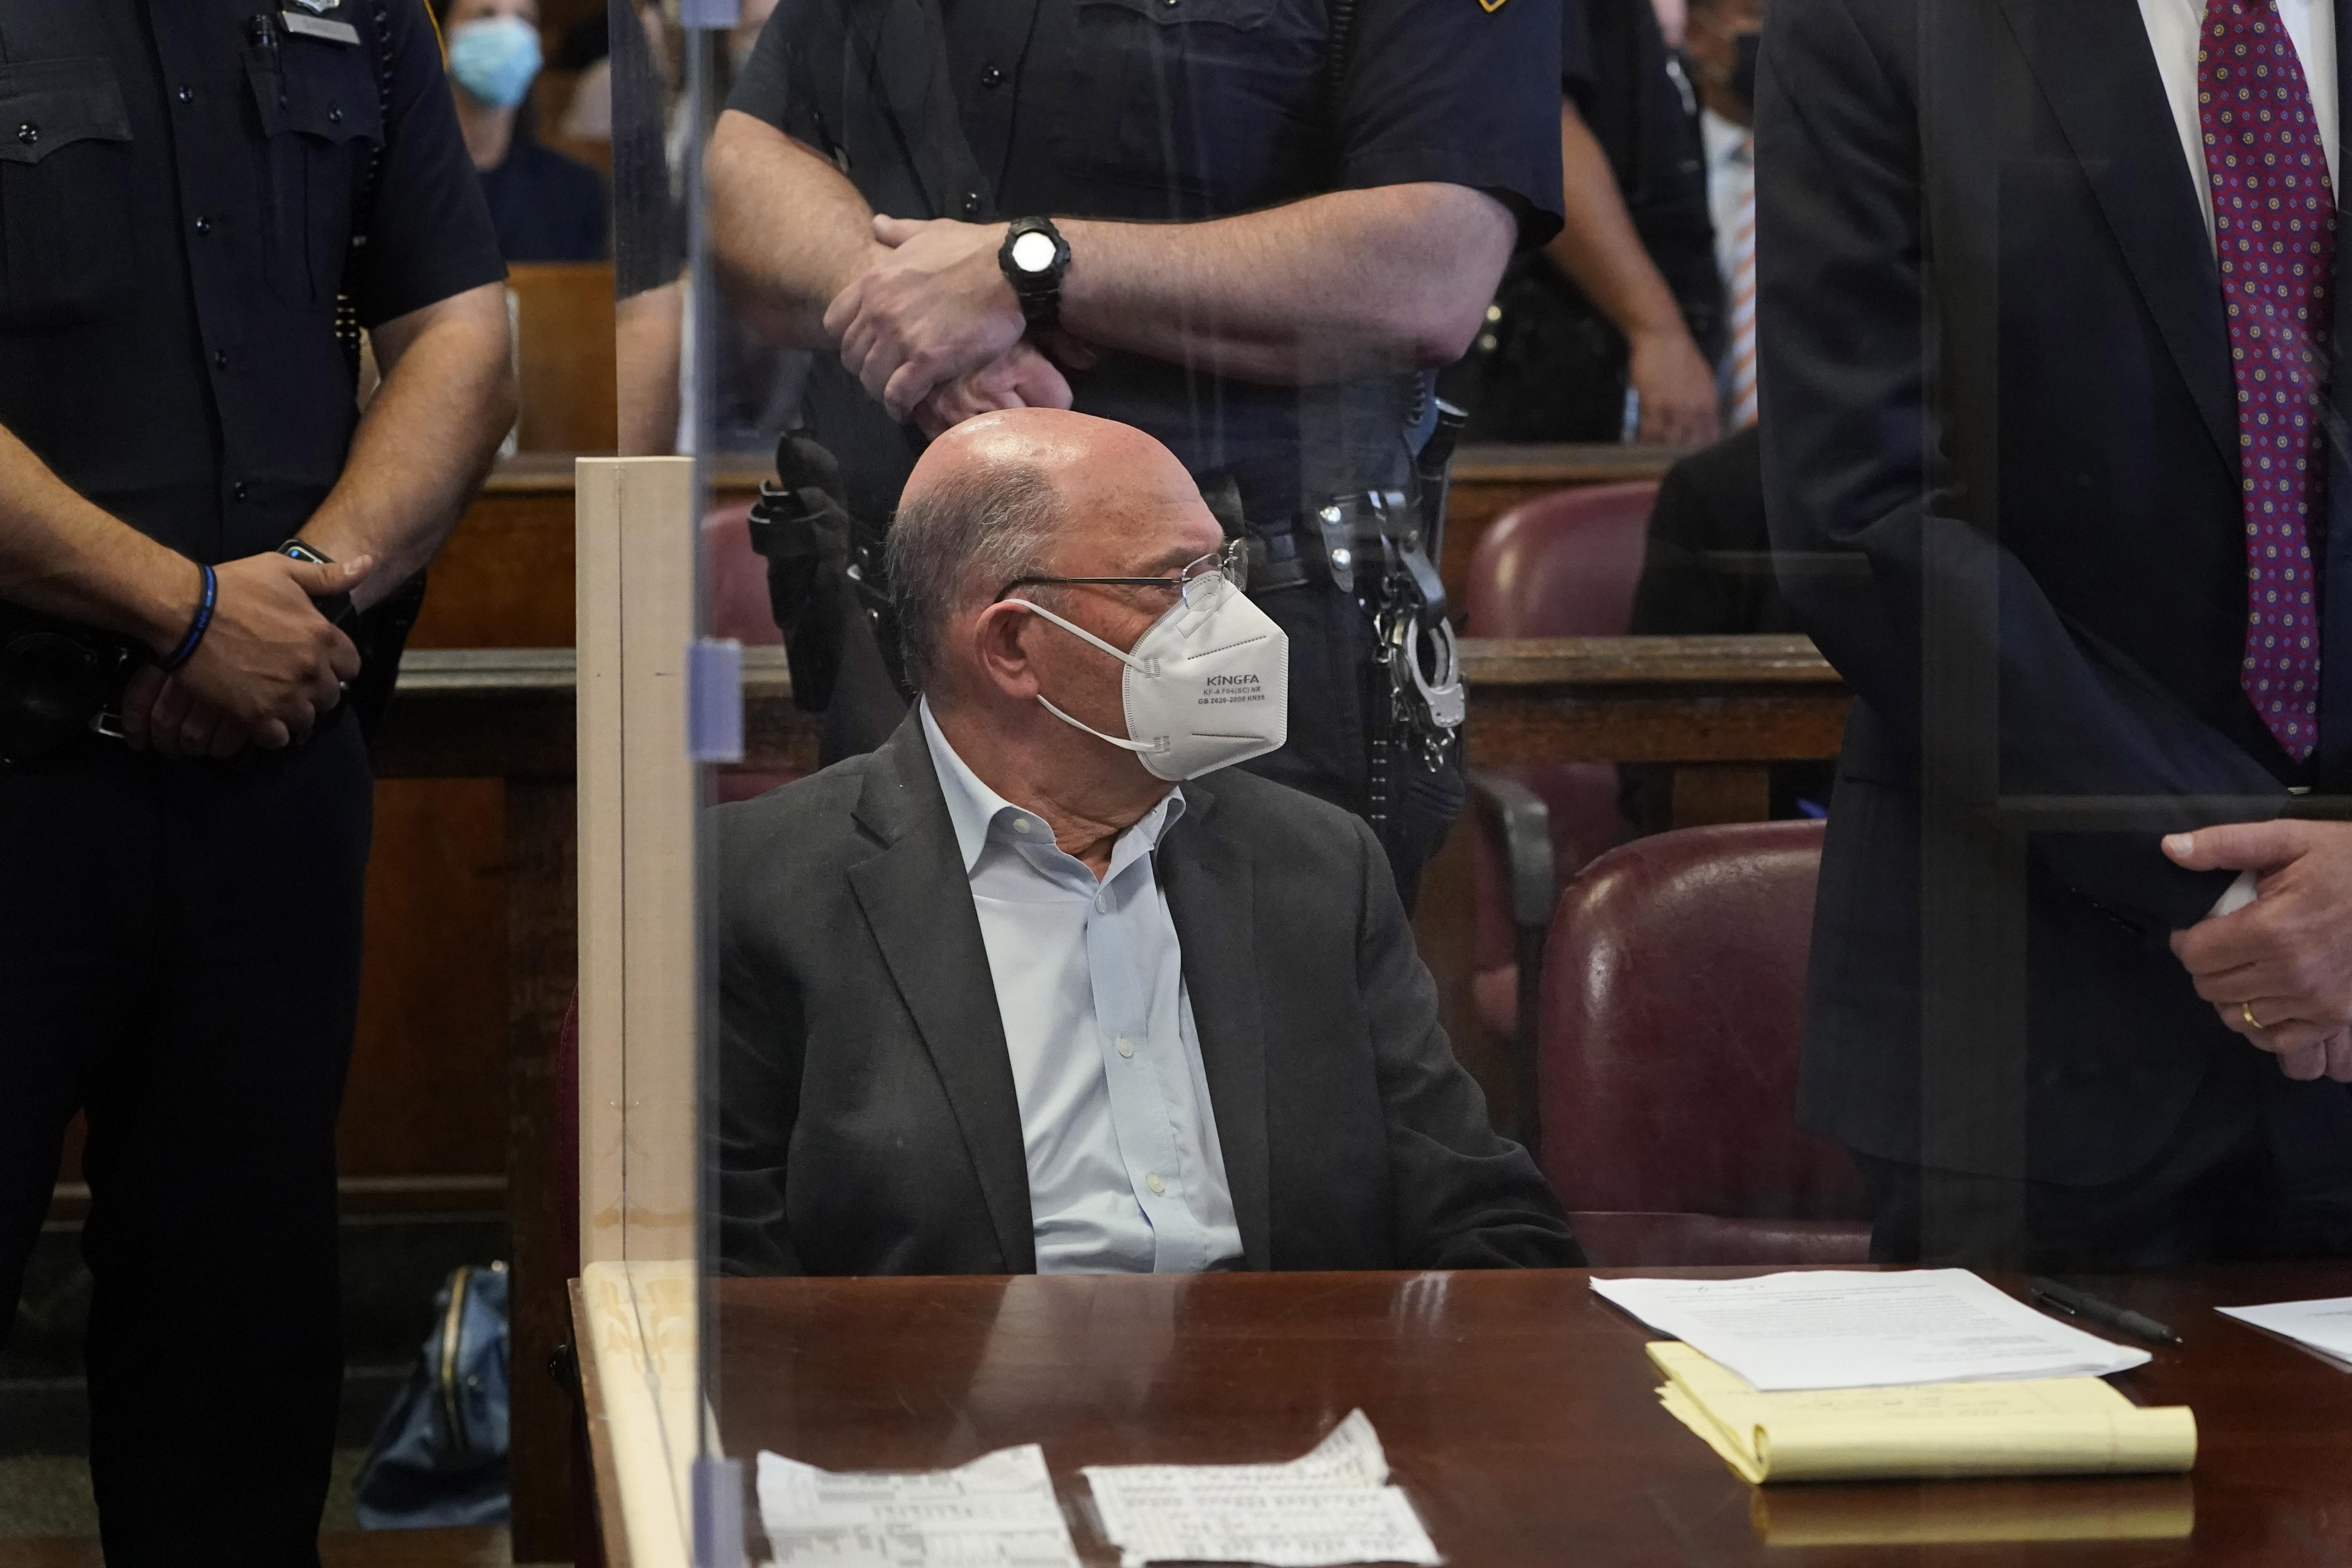 Weisselberg wears a mask and a gray suit, sitting in the courtroom.